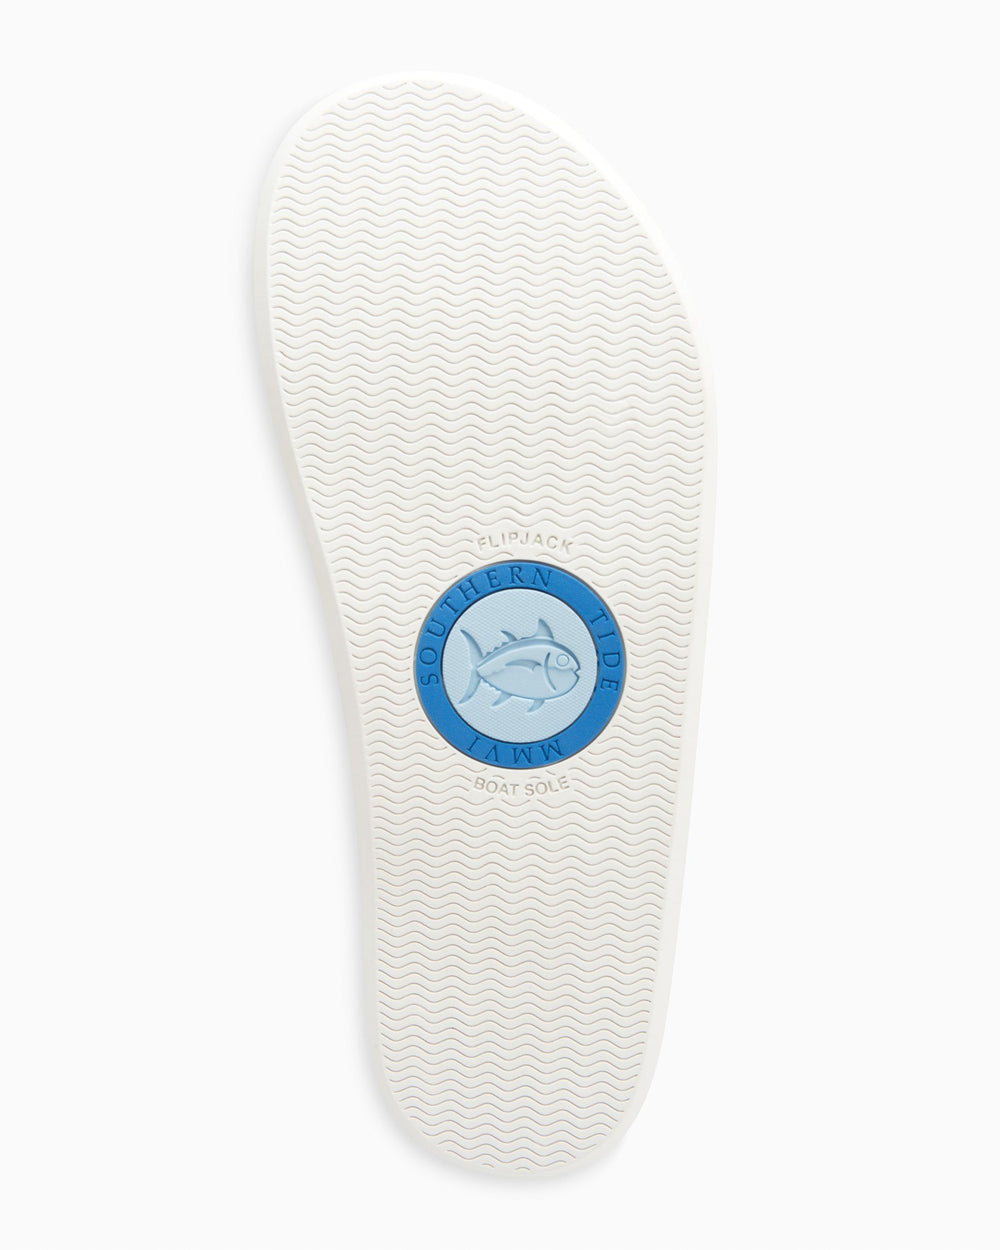 The back view of the Women's Weekend Metallic Silver Leather Flipjacks by Southern Tide - Metallic Silver